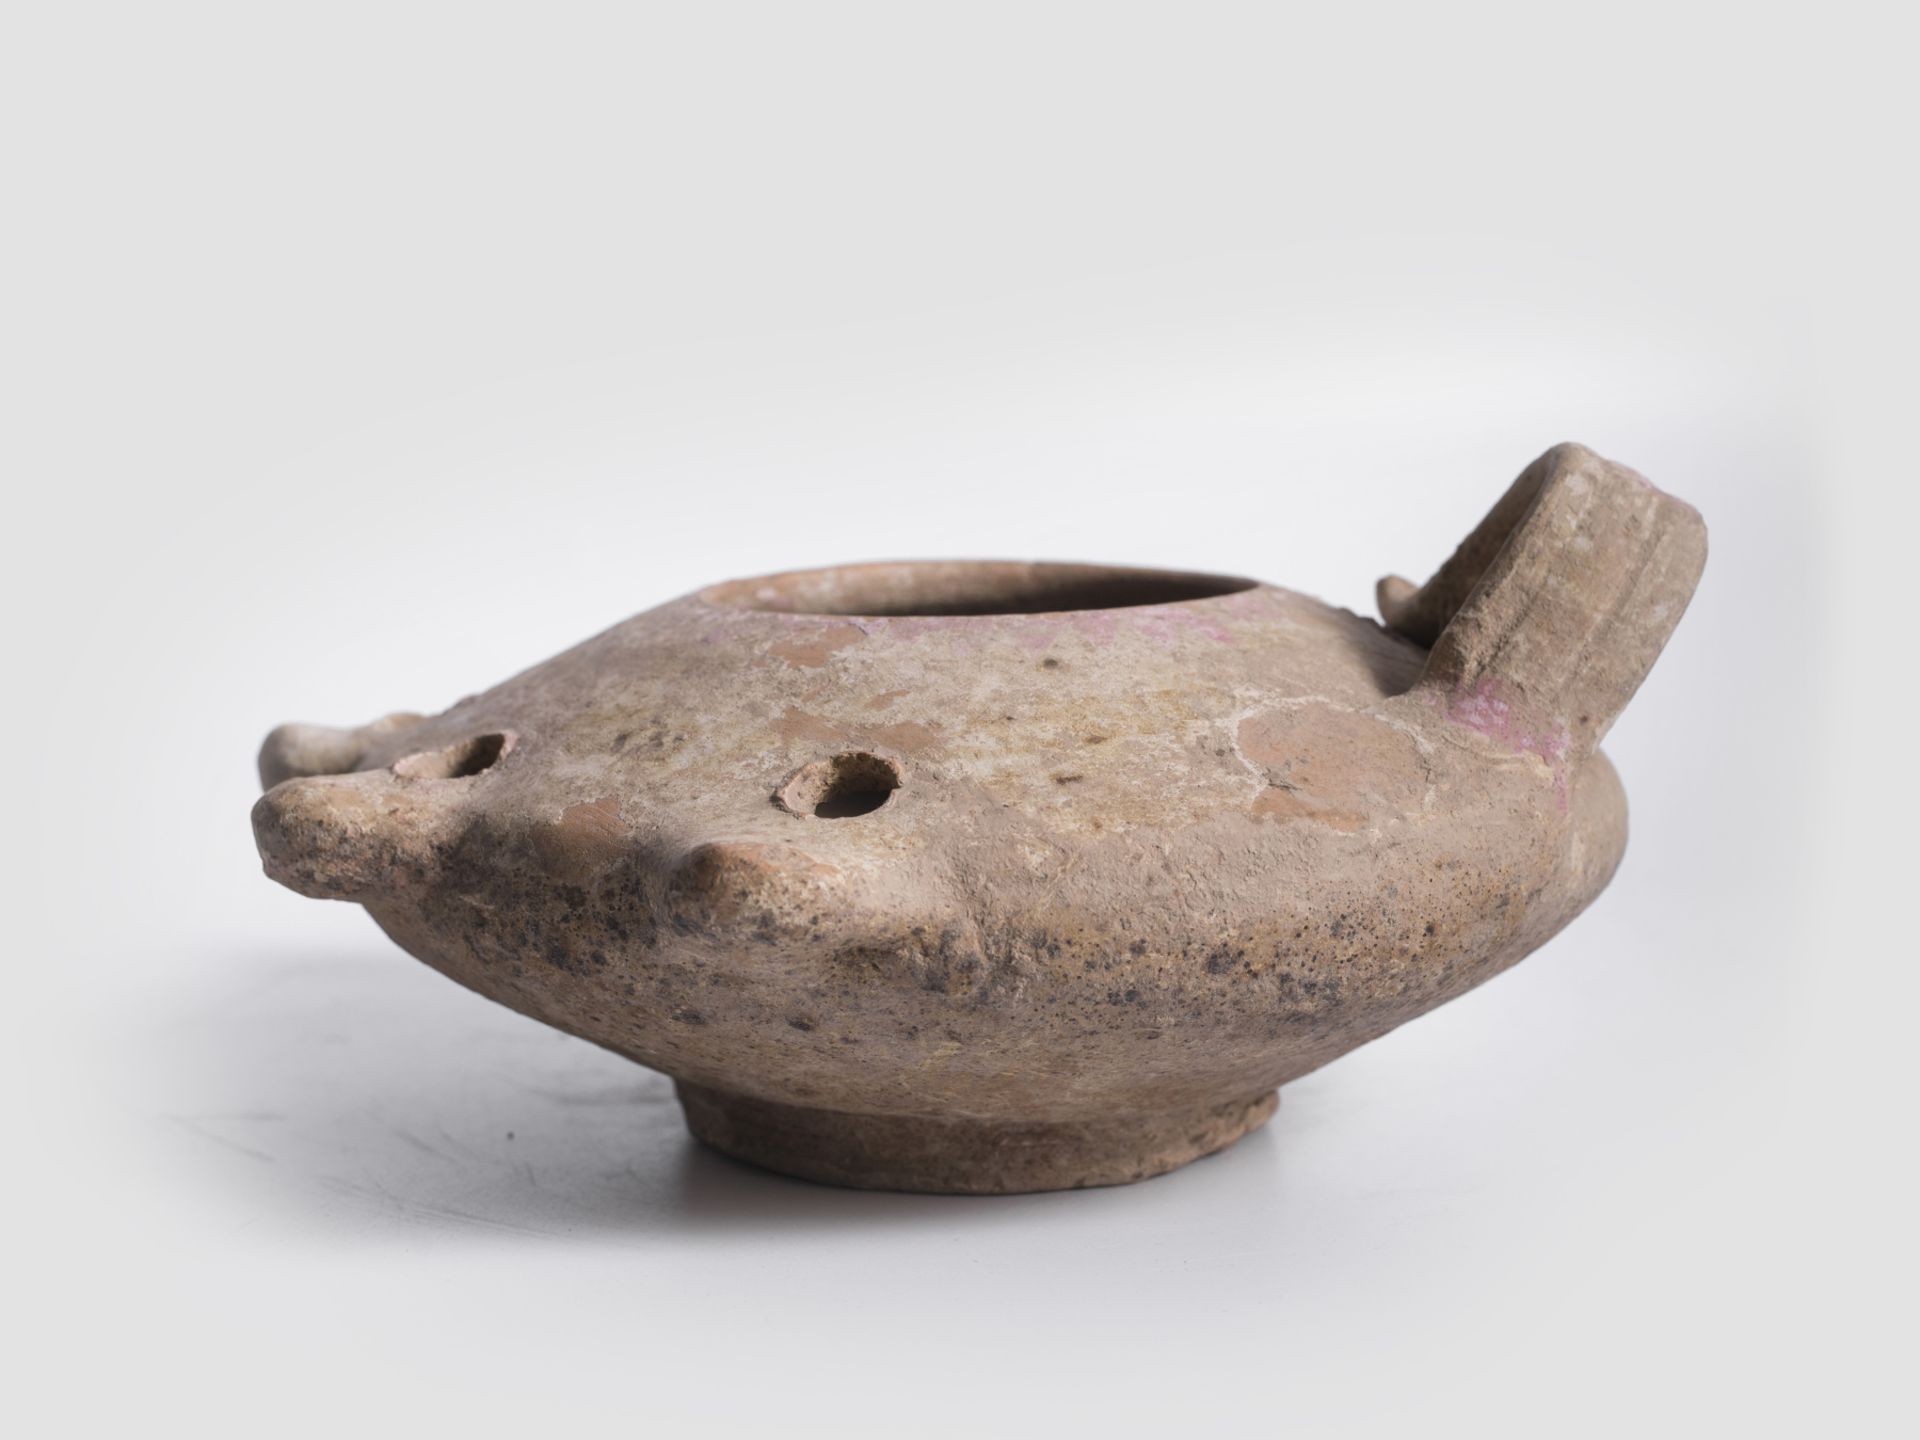 Antique oil lamp, Southern Europe or Near East, Antique, 1st - 3rd century AD - Image 2 of 6